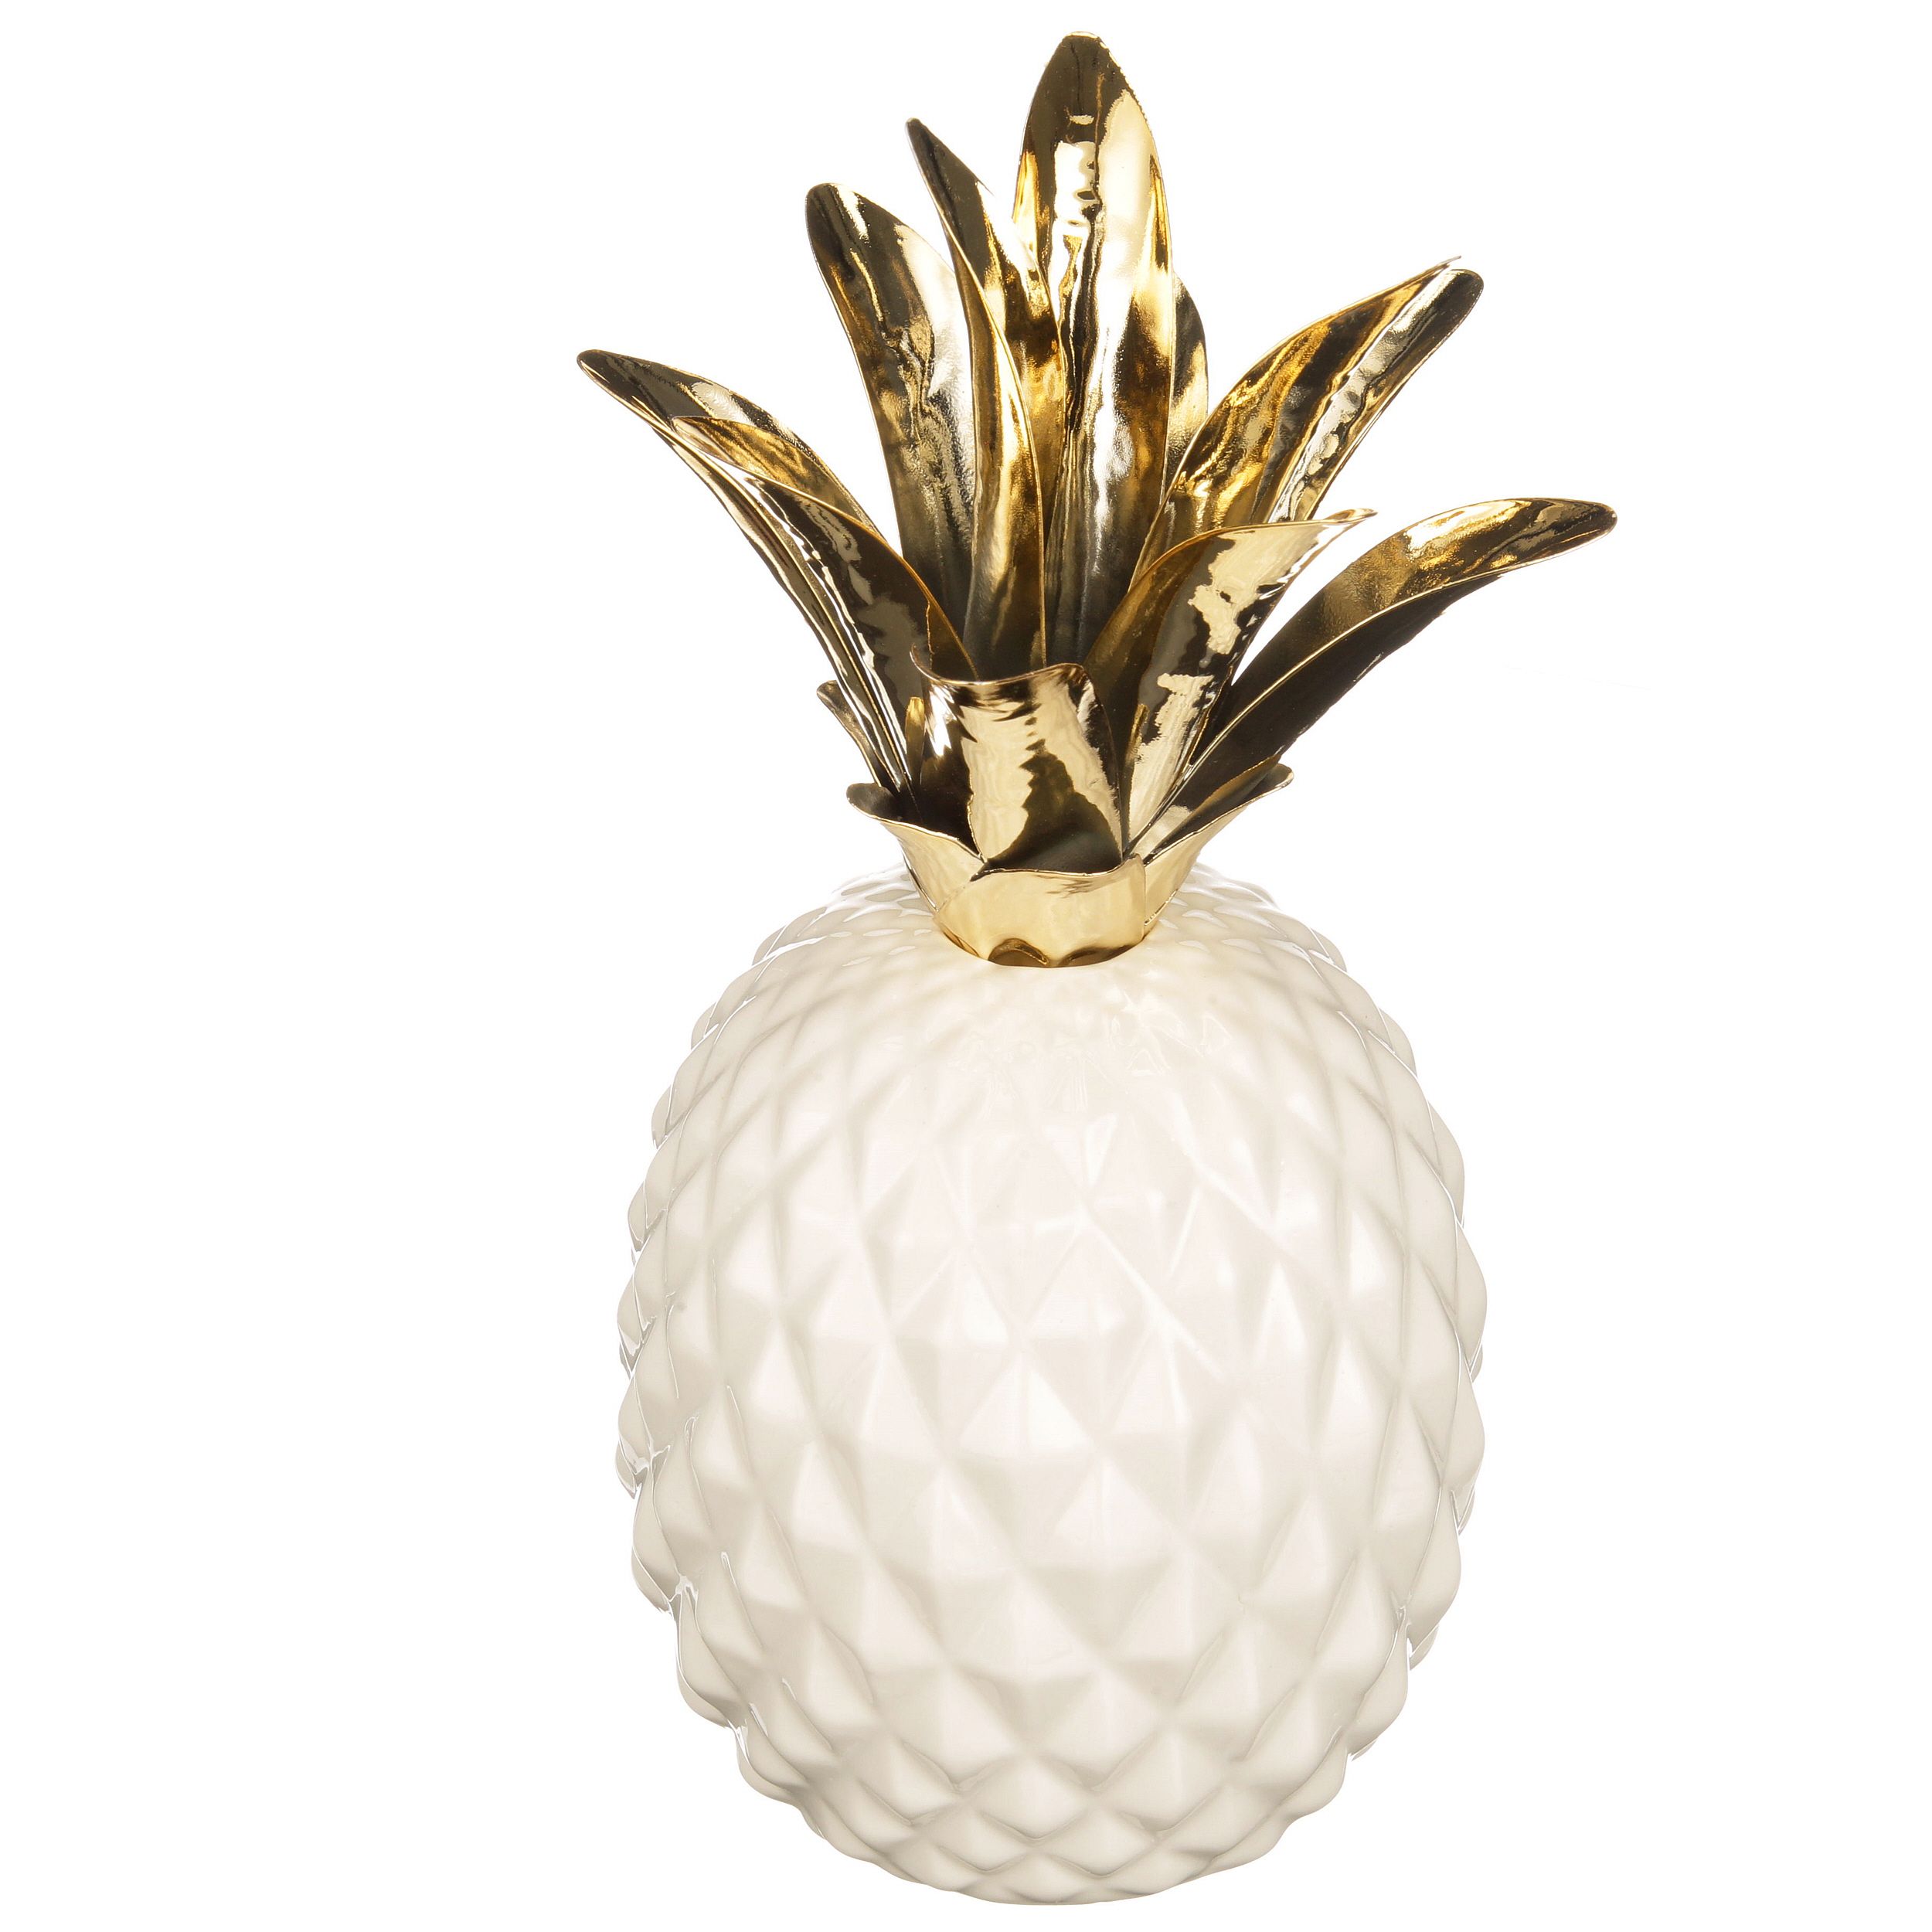 Better Homes & Gardens Decorative Ceramic Pineapple, White and Gold | Walmart (US)